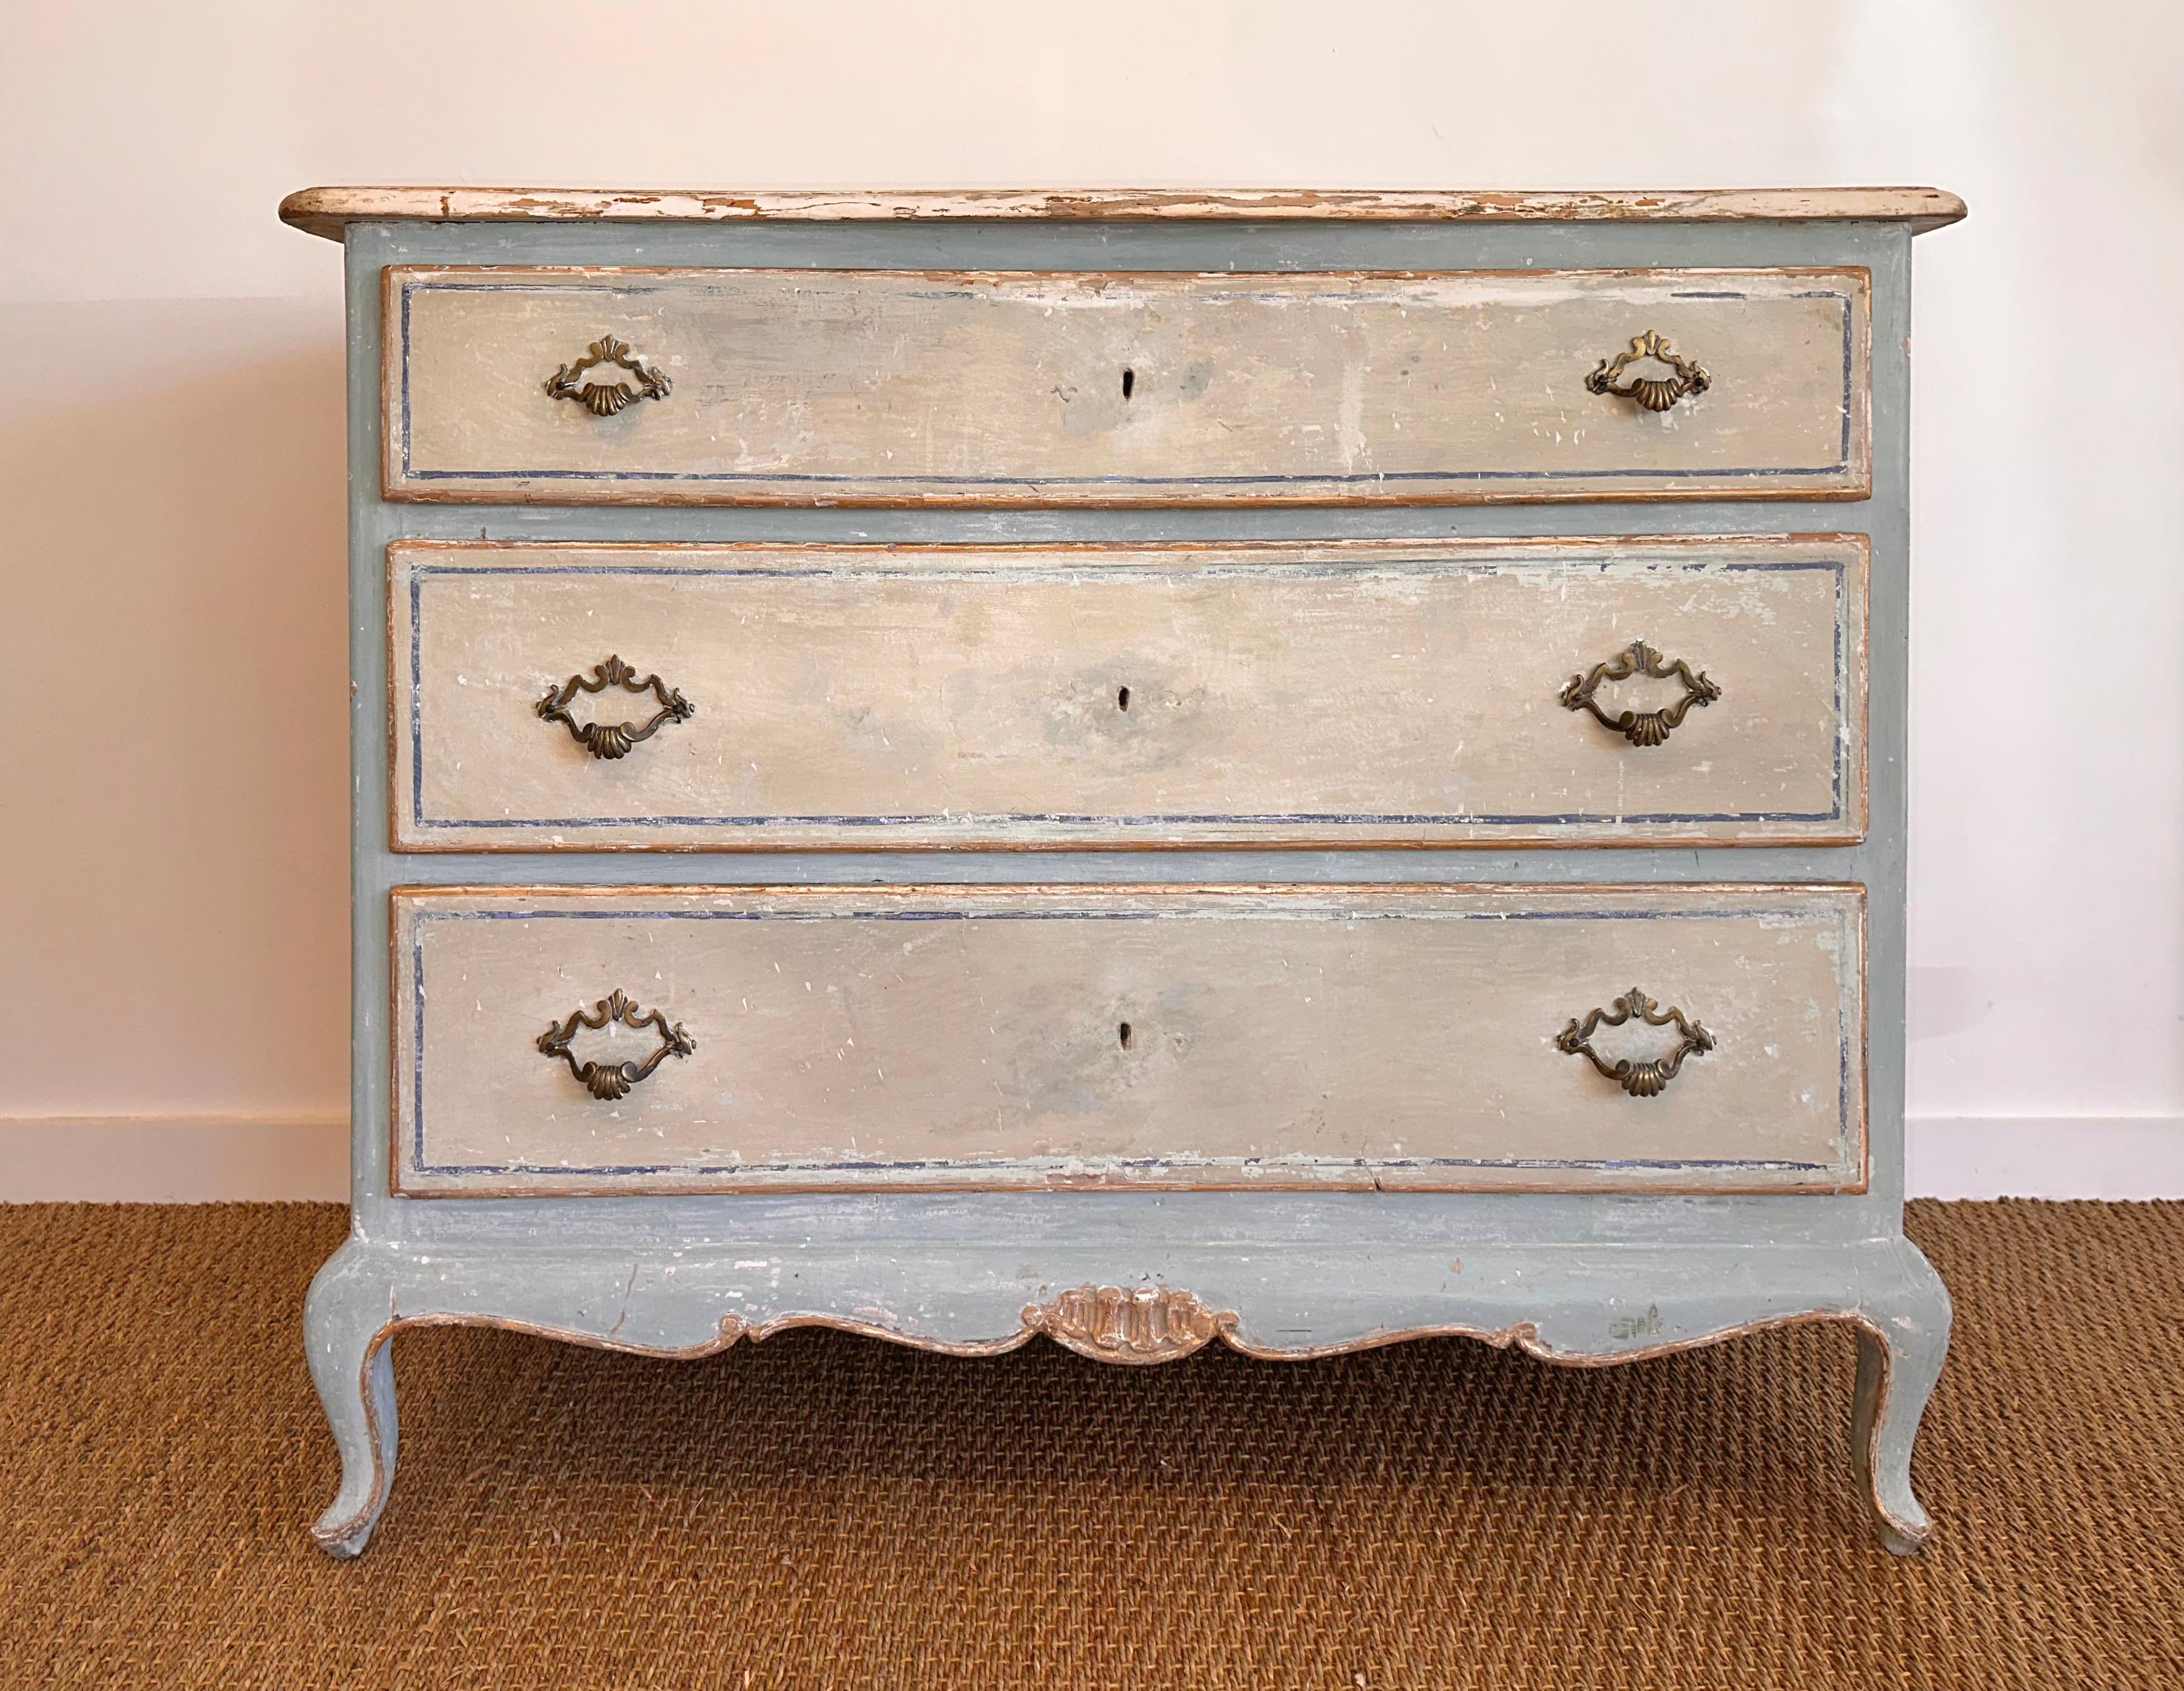 Delightful painted Italian chest in the Louis XVI Style.  very early 19th c.  Highly decorative.   Cream painted drawers with blue and gold border detailing.  Pale blue frame with gold details.  Cream top matching drawers and side panels.  